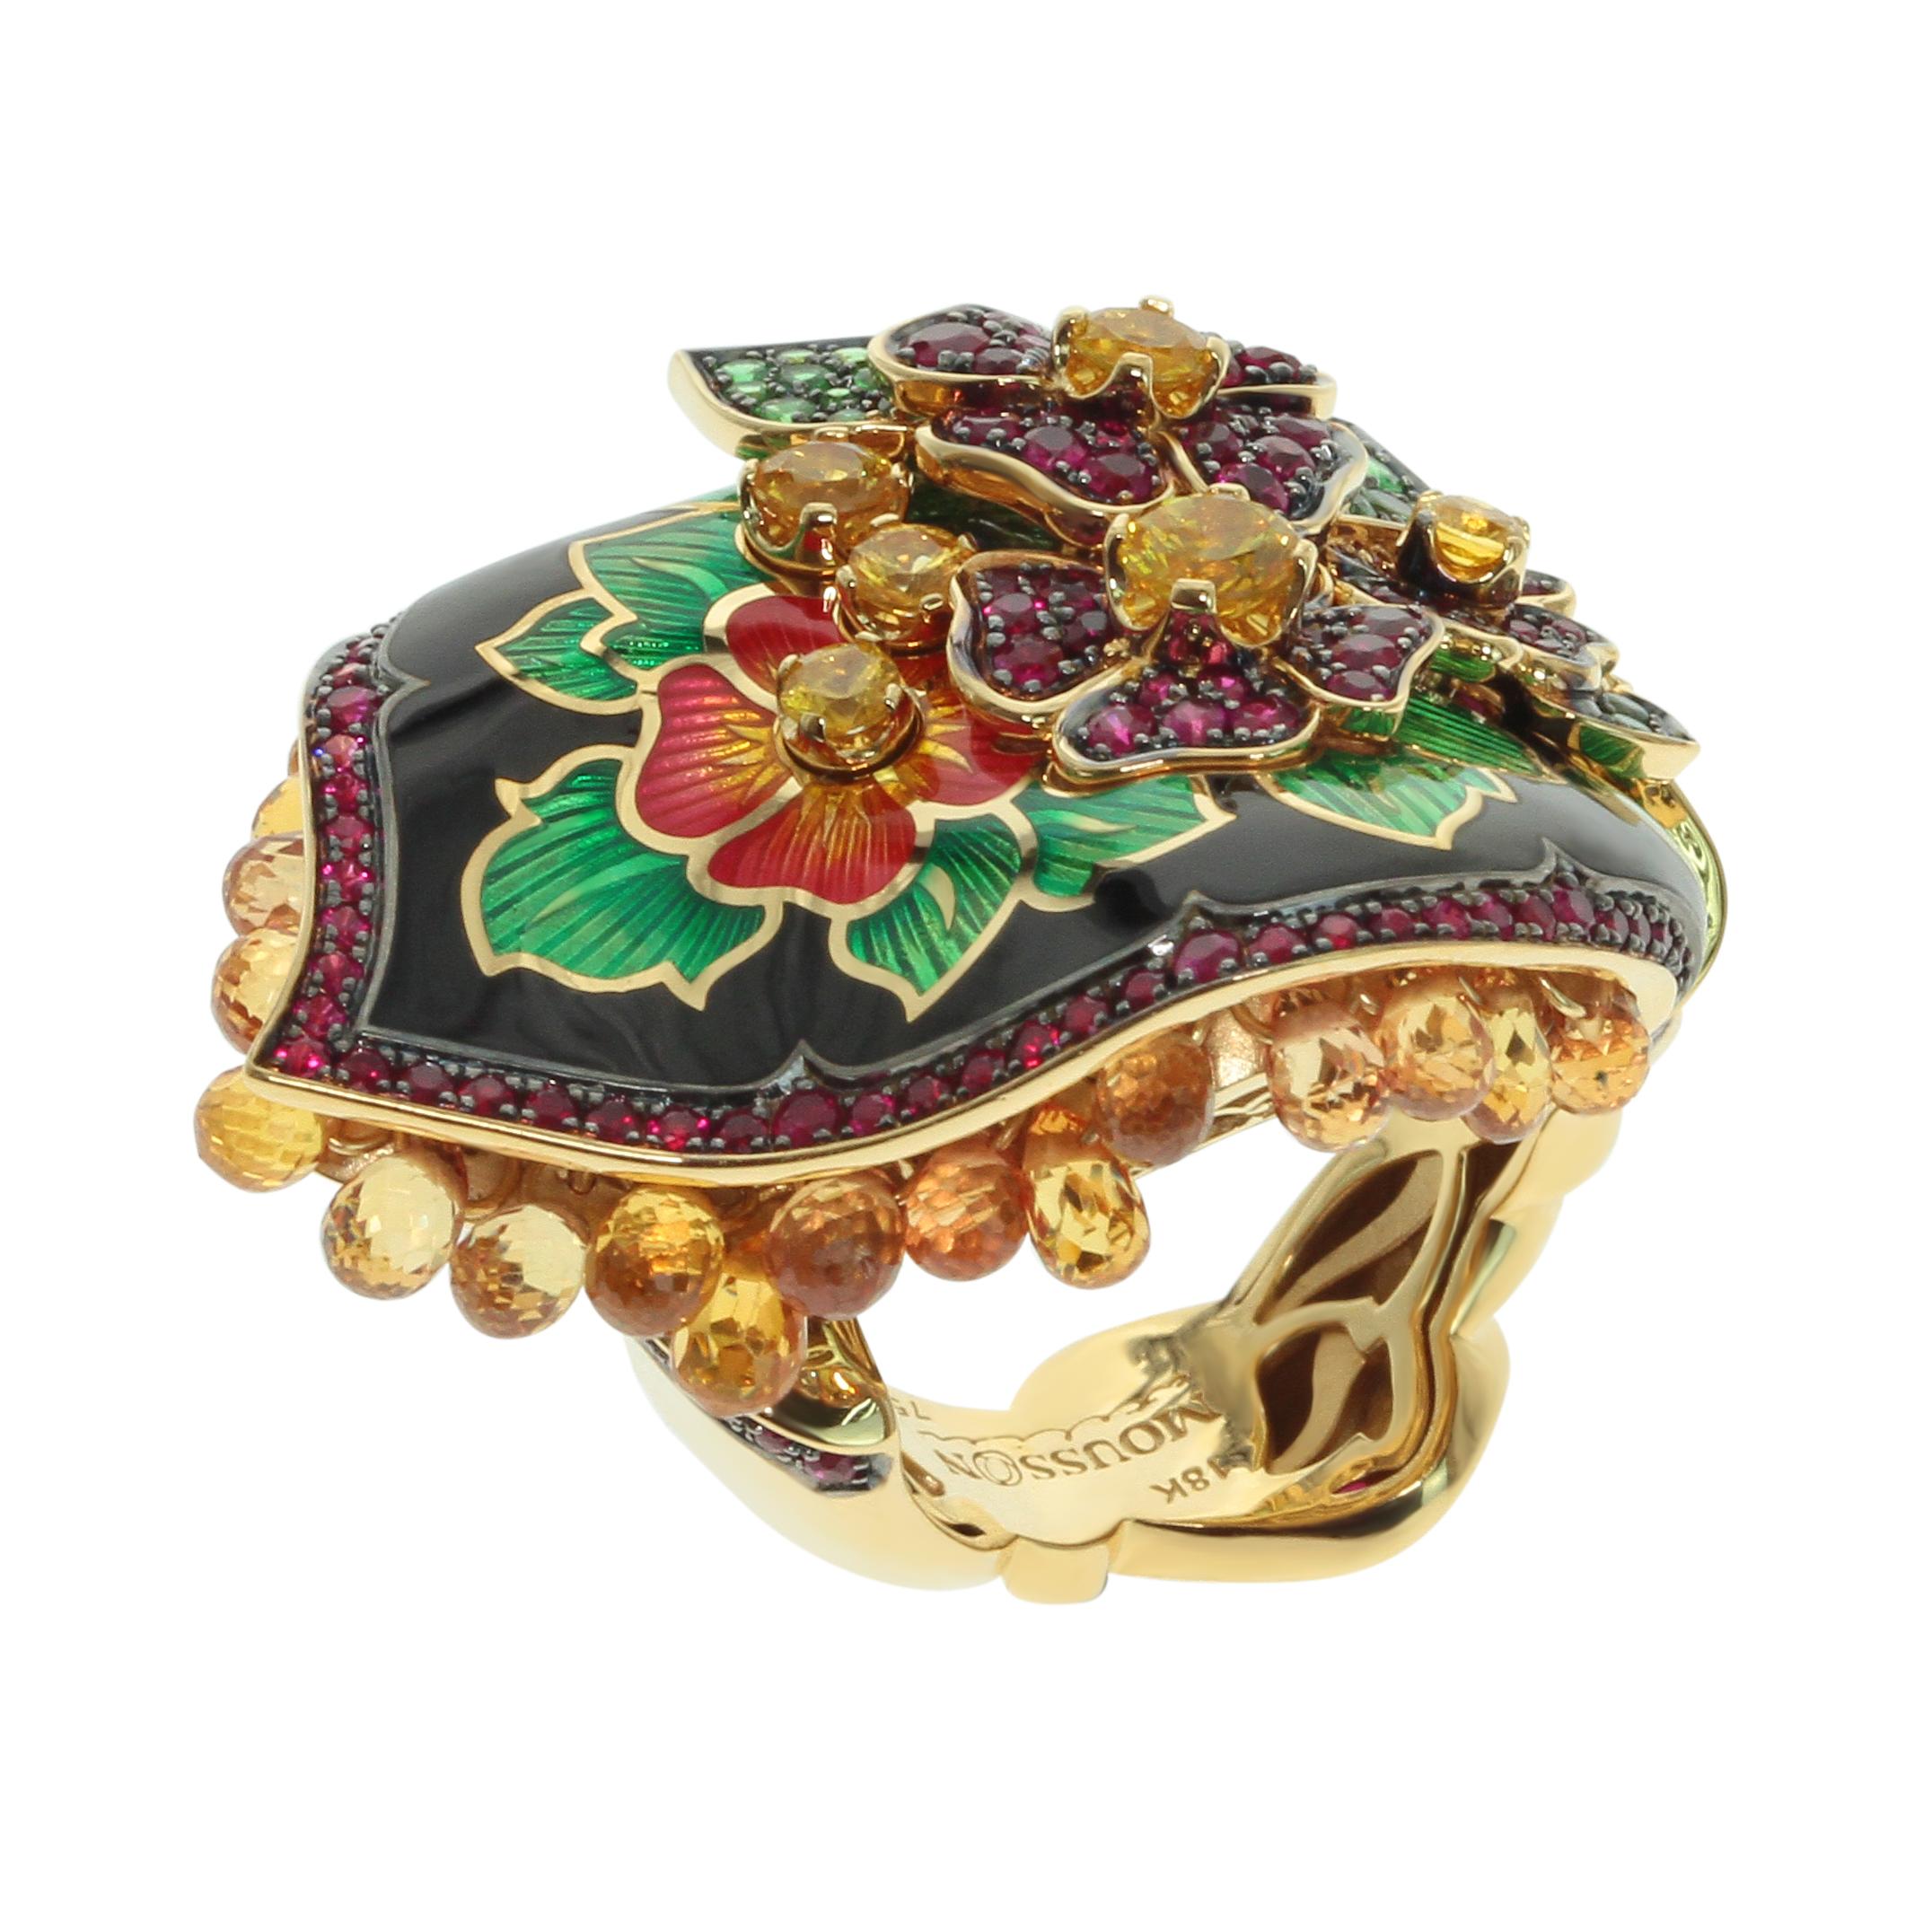 Sapphire Ruby Tsavorite Enamel A'la Russe Ring
What do you know about Pavlovo Posad shawls? This is a large part of Russian culture, which originated in the 17th century. They are large patterned scarves, which are usually presented as a gift to